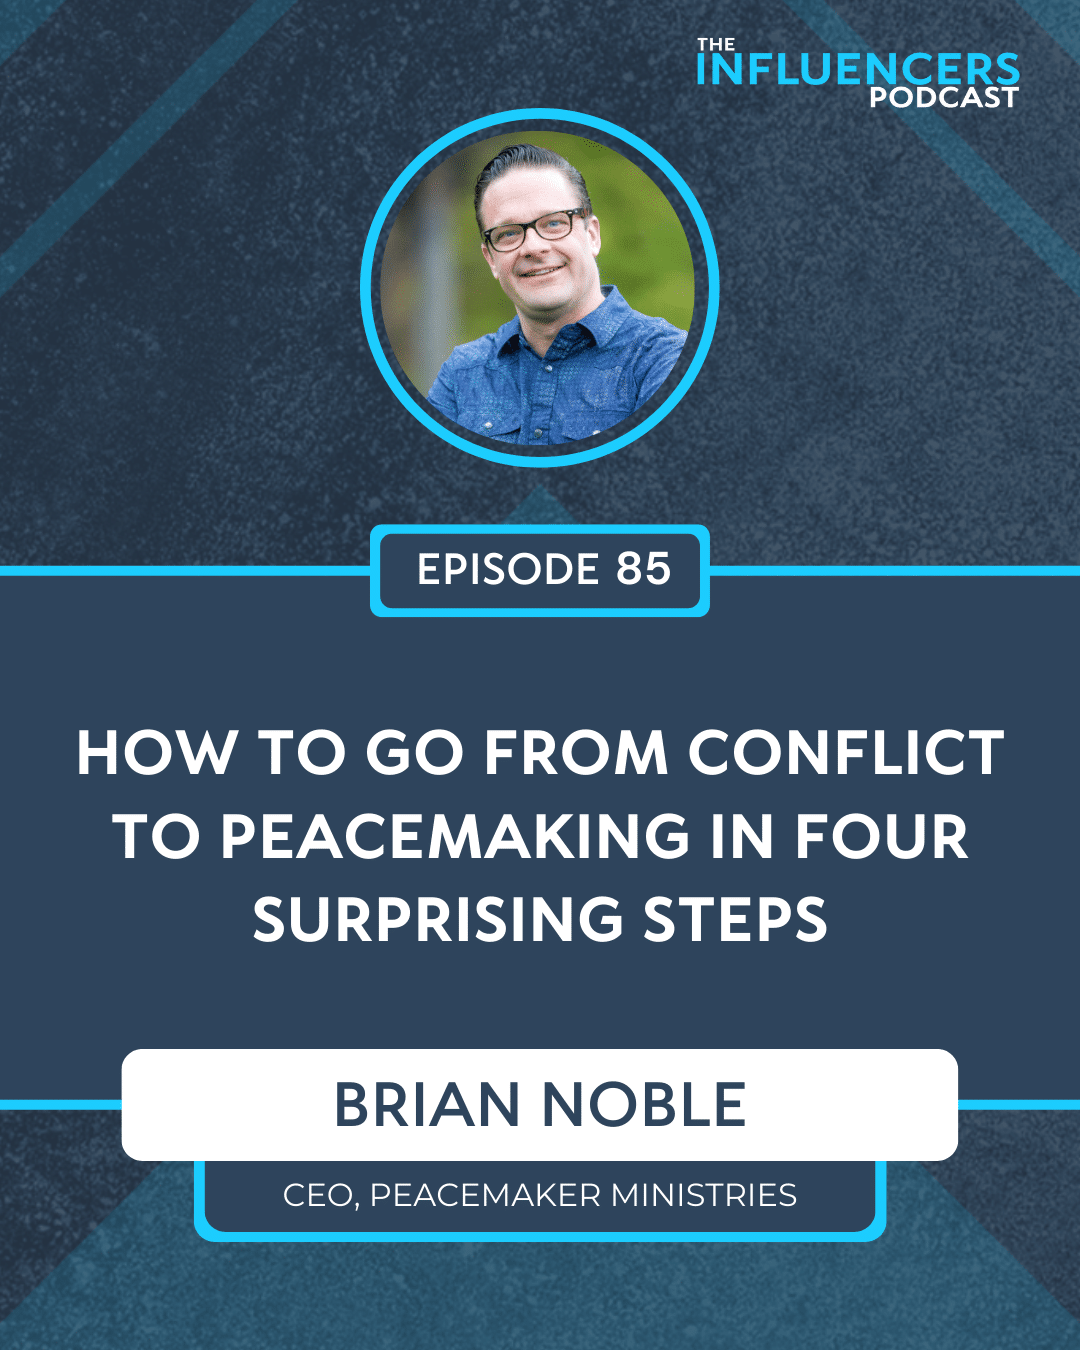 Episode 85 with Brian Noble.